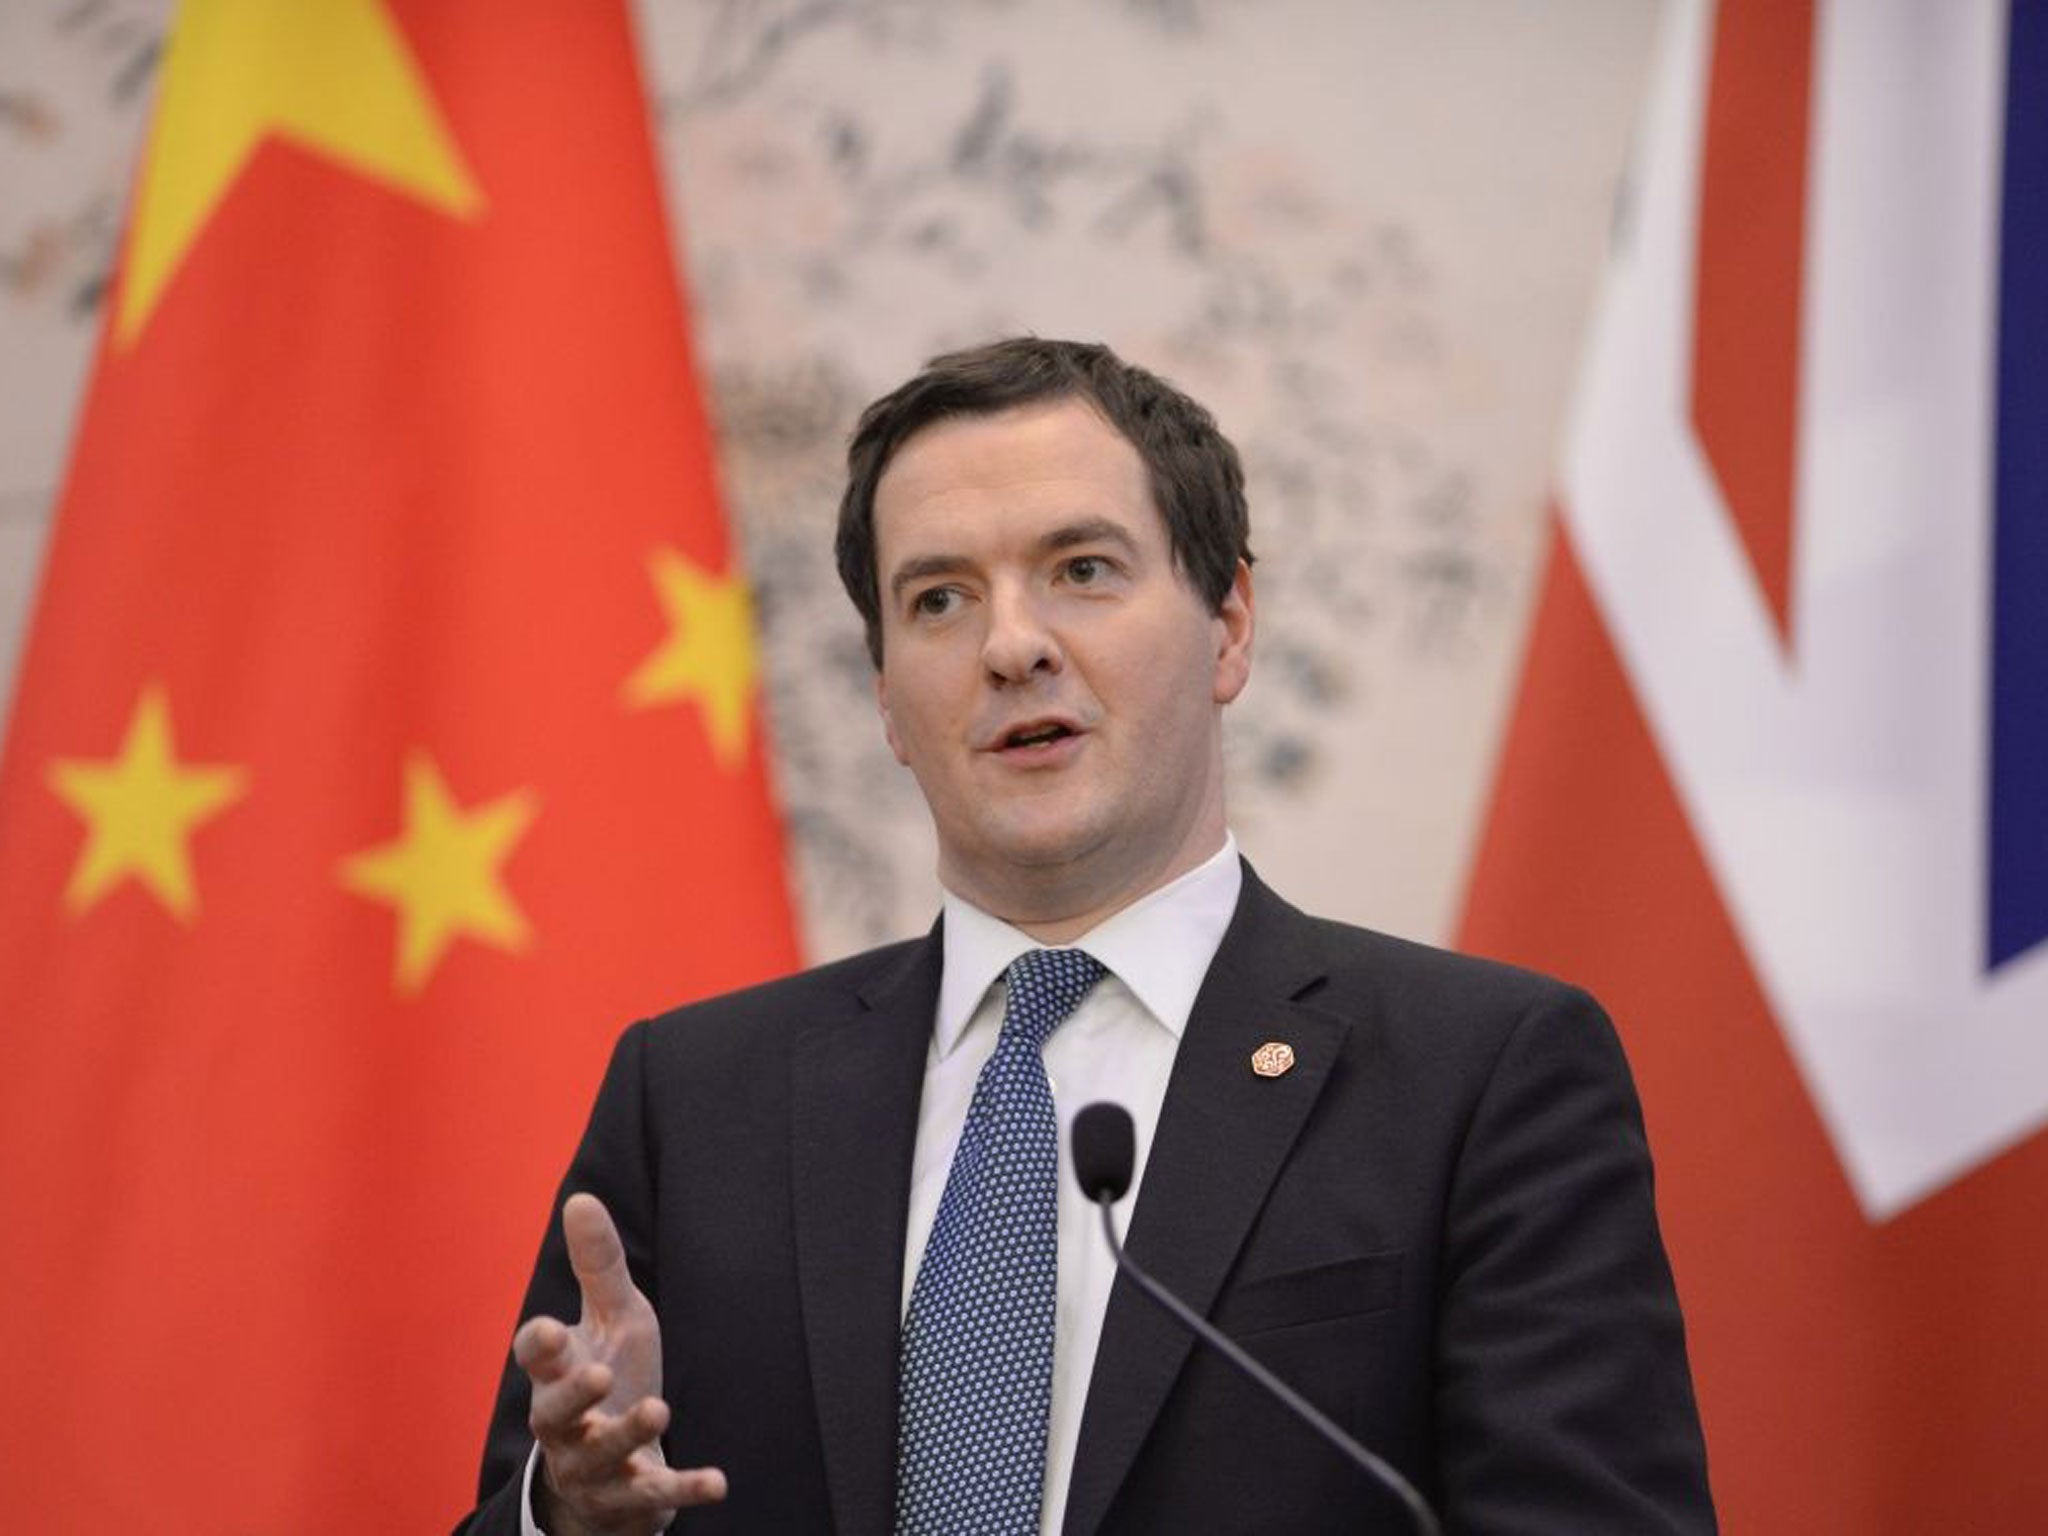 George Osborne has announced that Chinese companies will be allowed to buy a majority stake in UK nuclear power plants